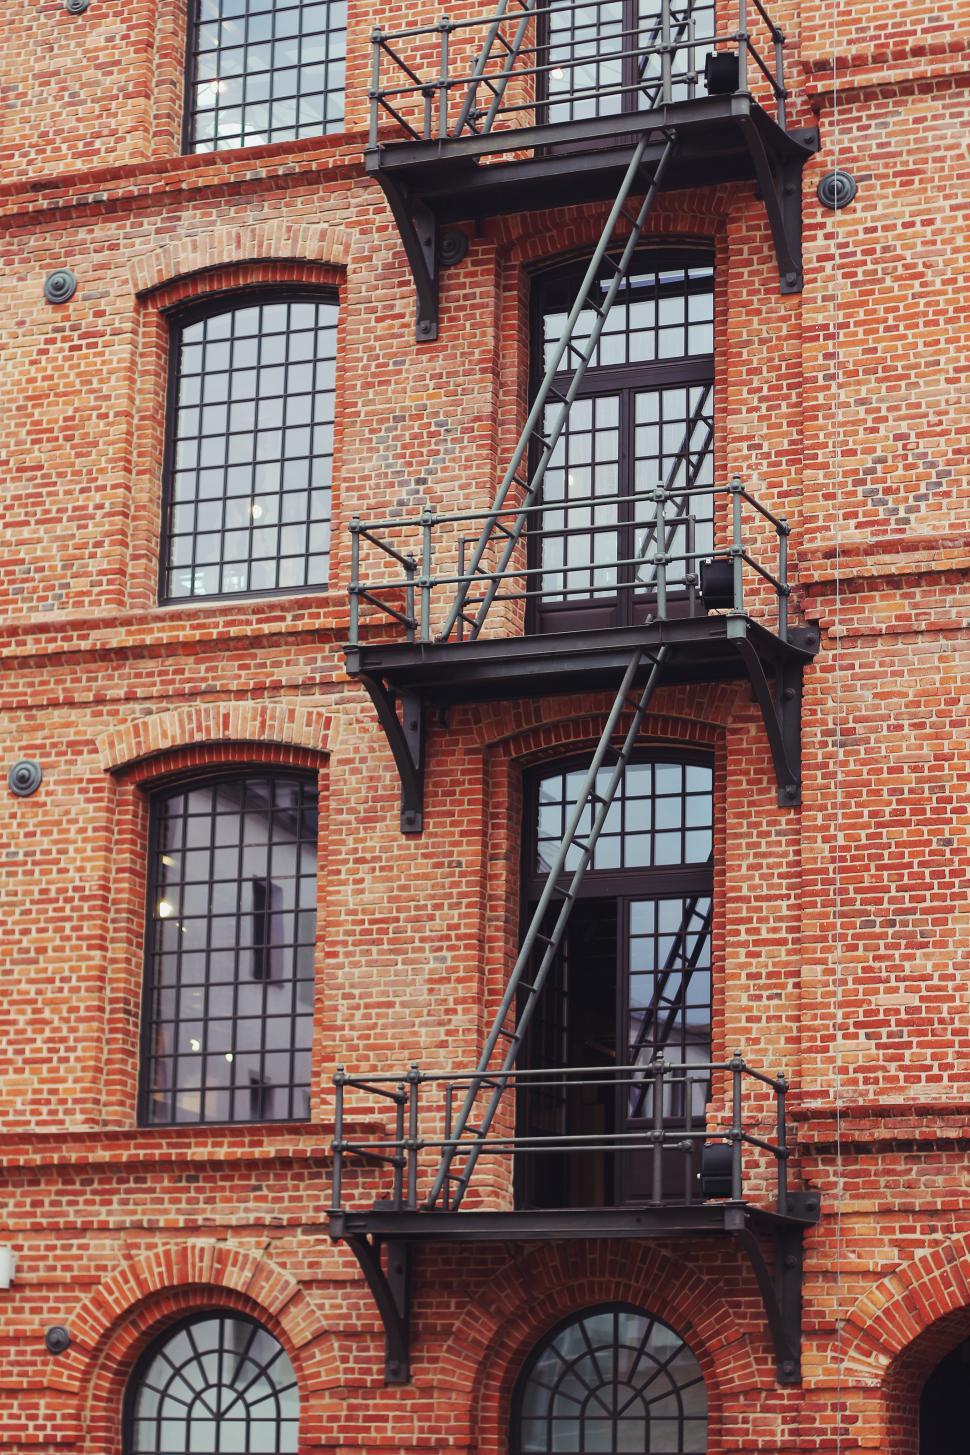 Free Image of Tall Brick Building With Lots of Windows 